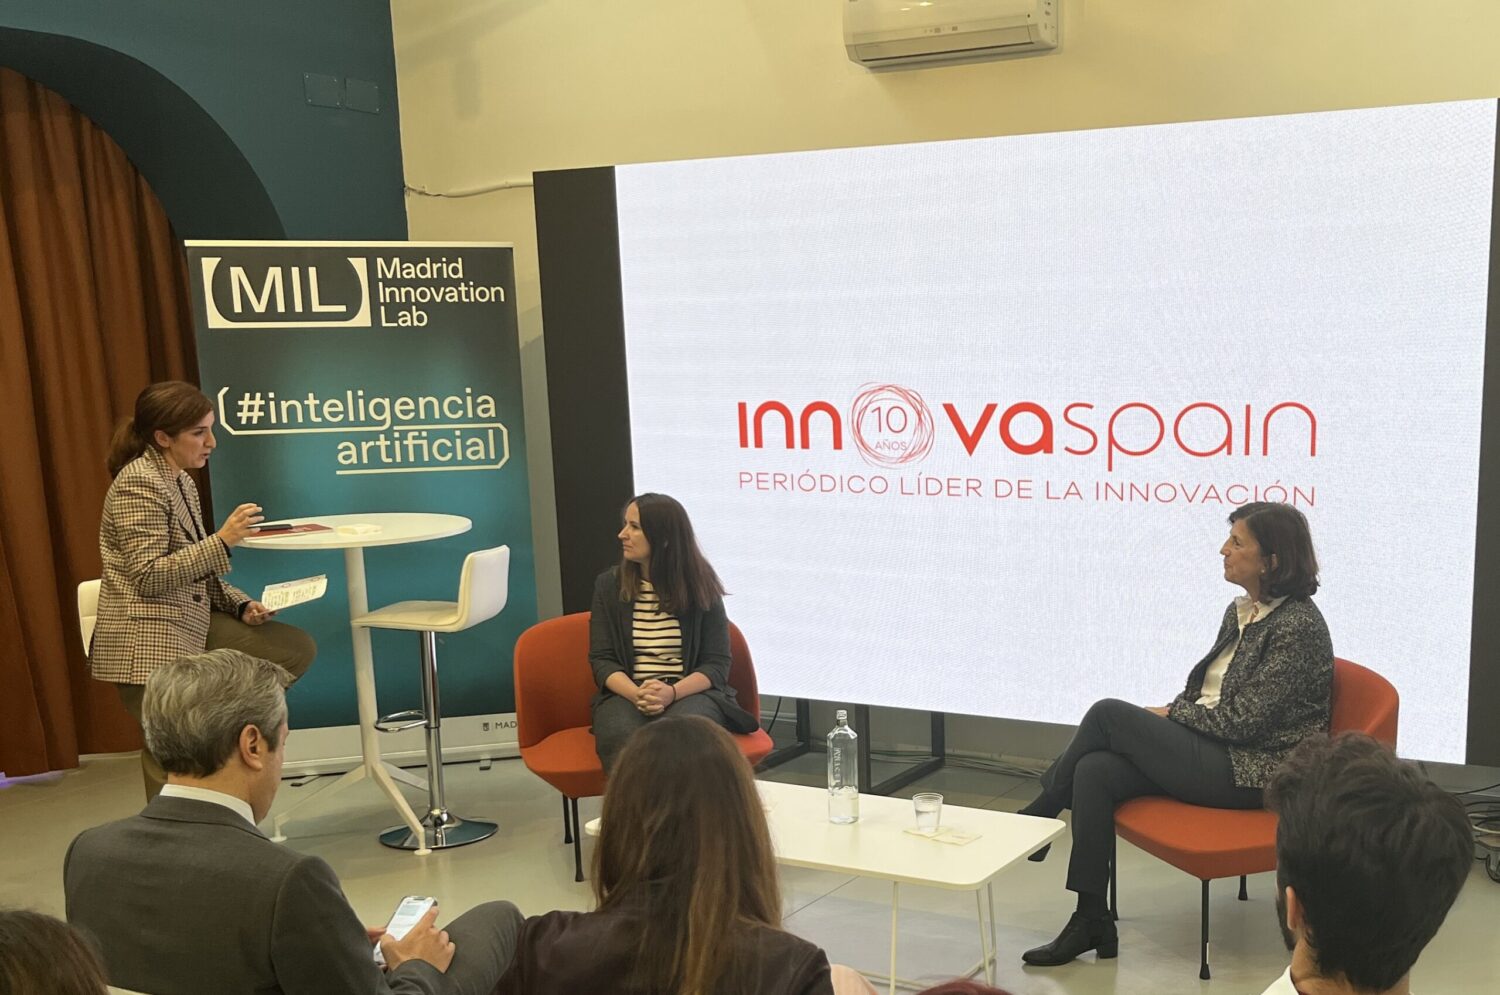 Paloma Domingo participates in the presentation of the “Yearbook of Innovation in Spain” by Innovaspain